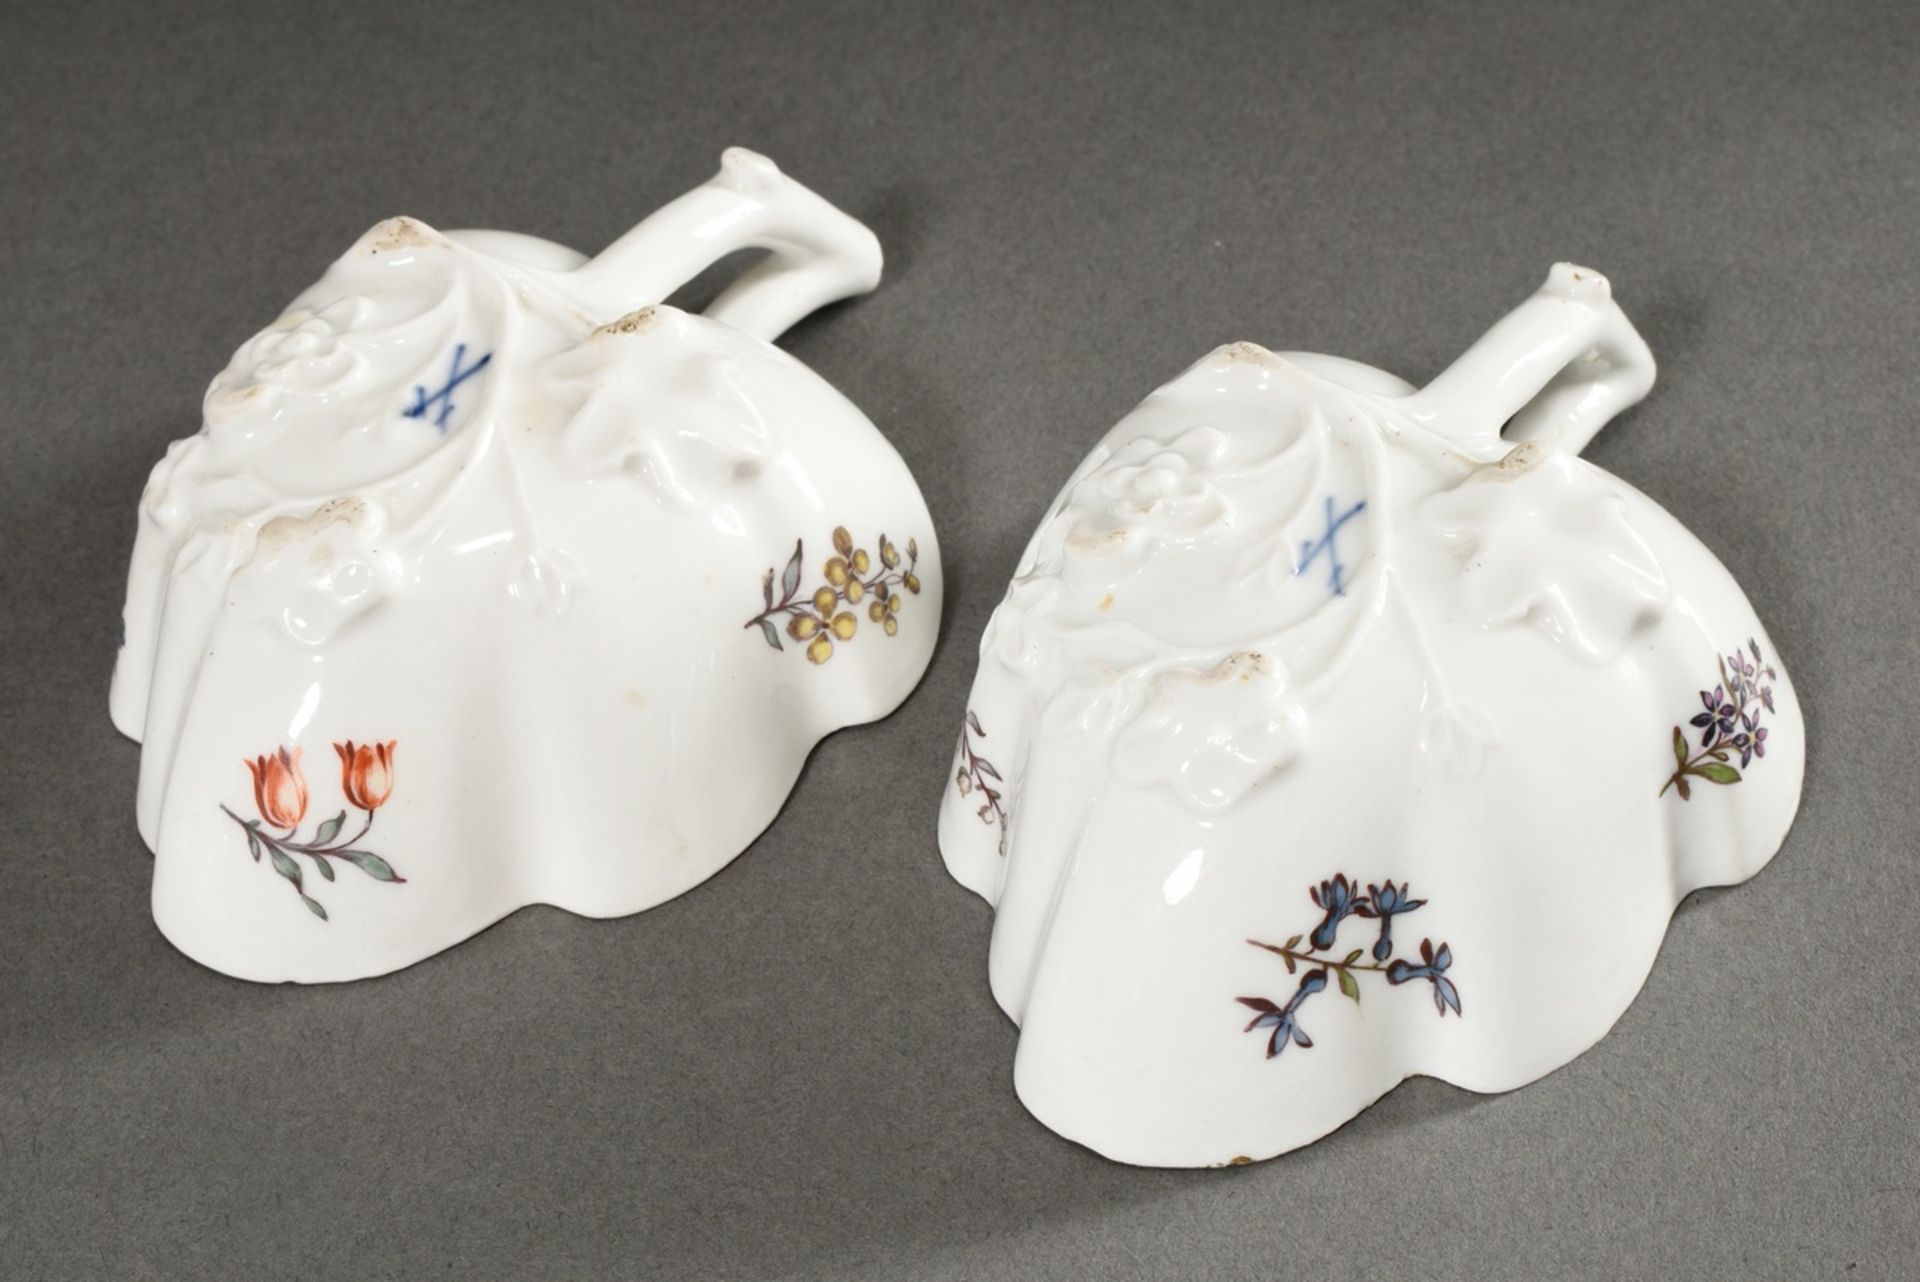 4 Pieces Meissen with polychrome "woodcut flowers" painting, 18th c.: 2 leaf bowls (12x9cm, 1x rest - Image 7 of 7